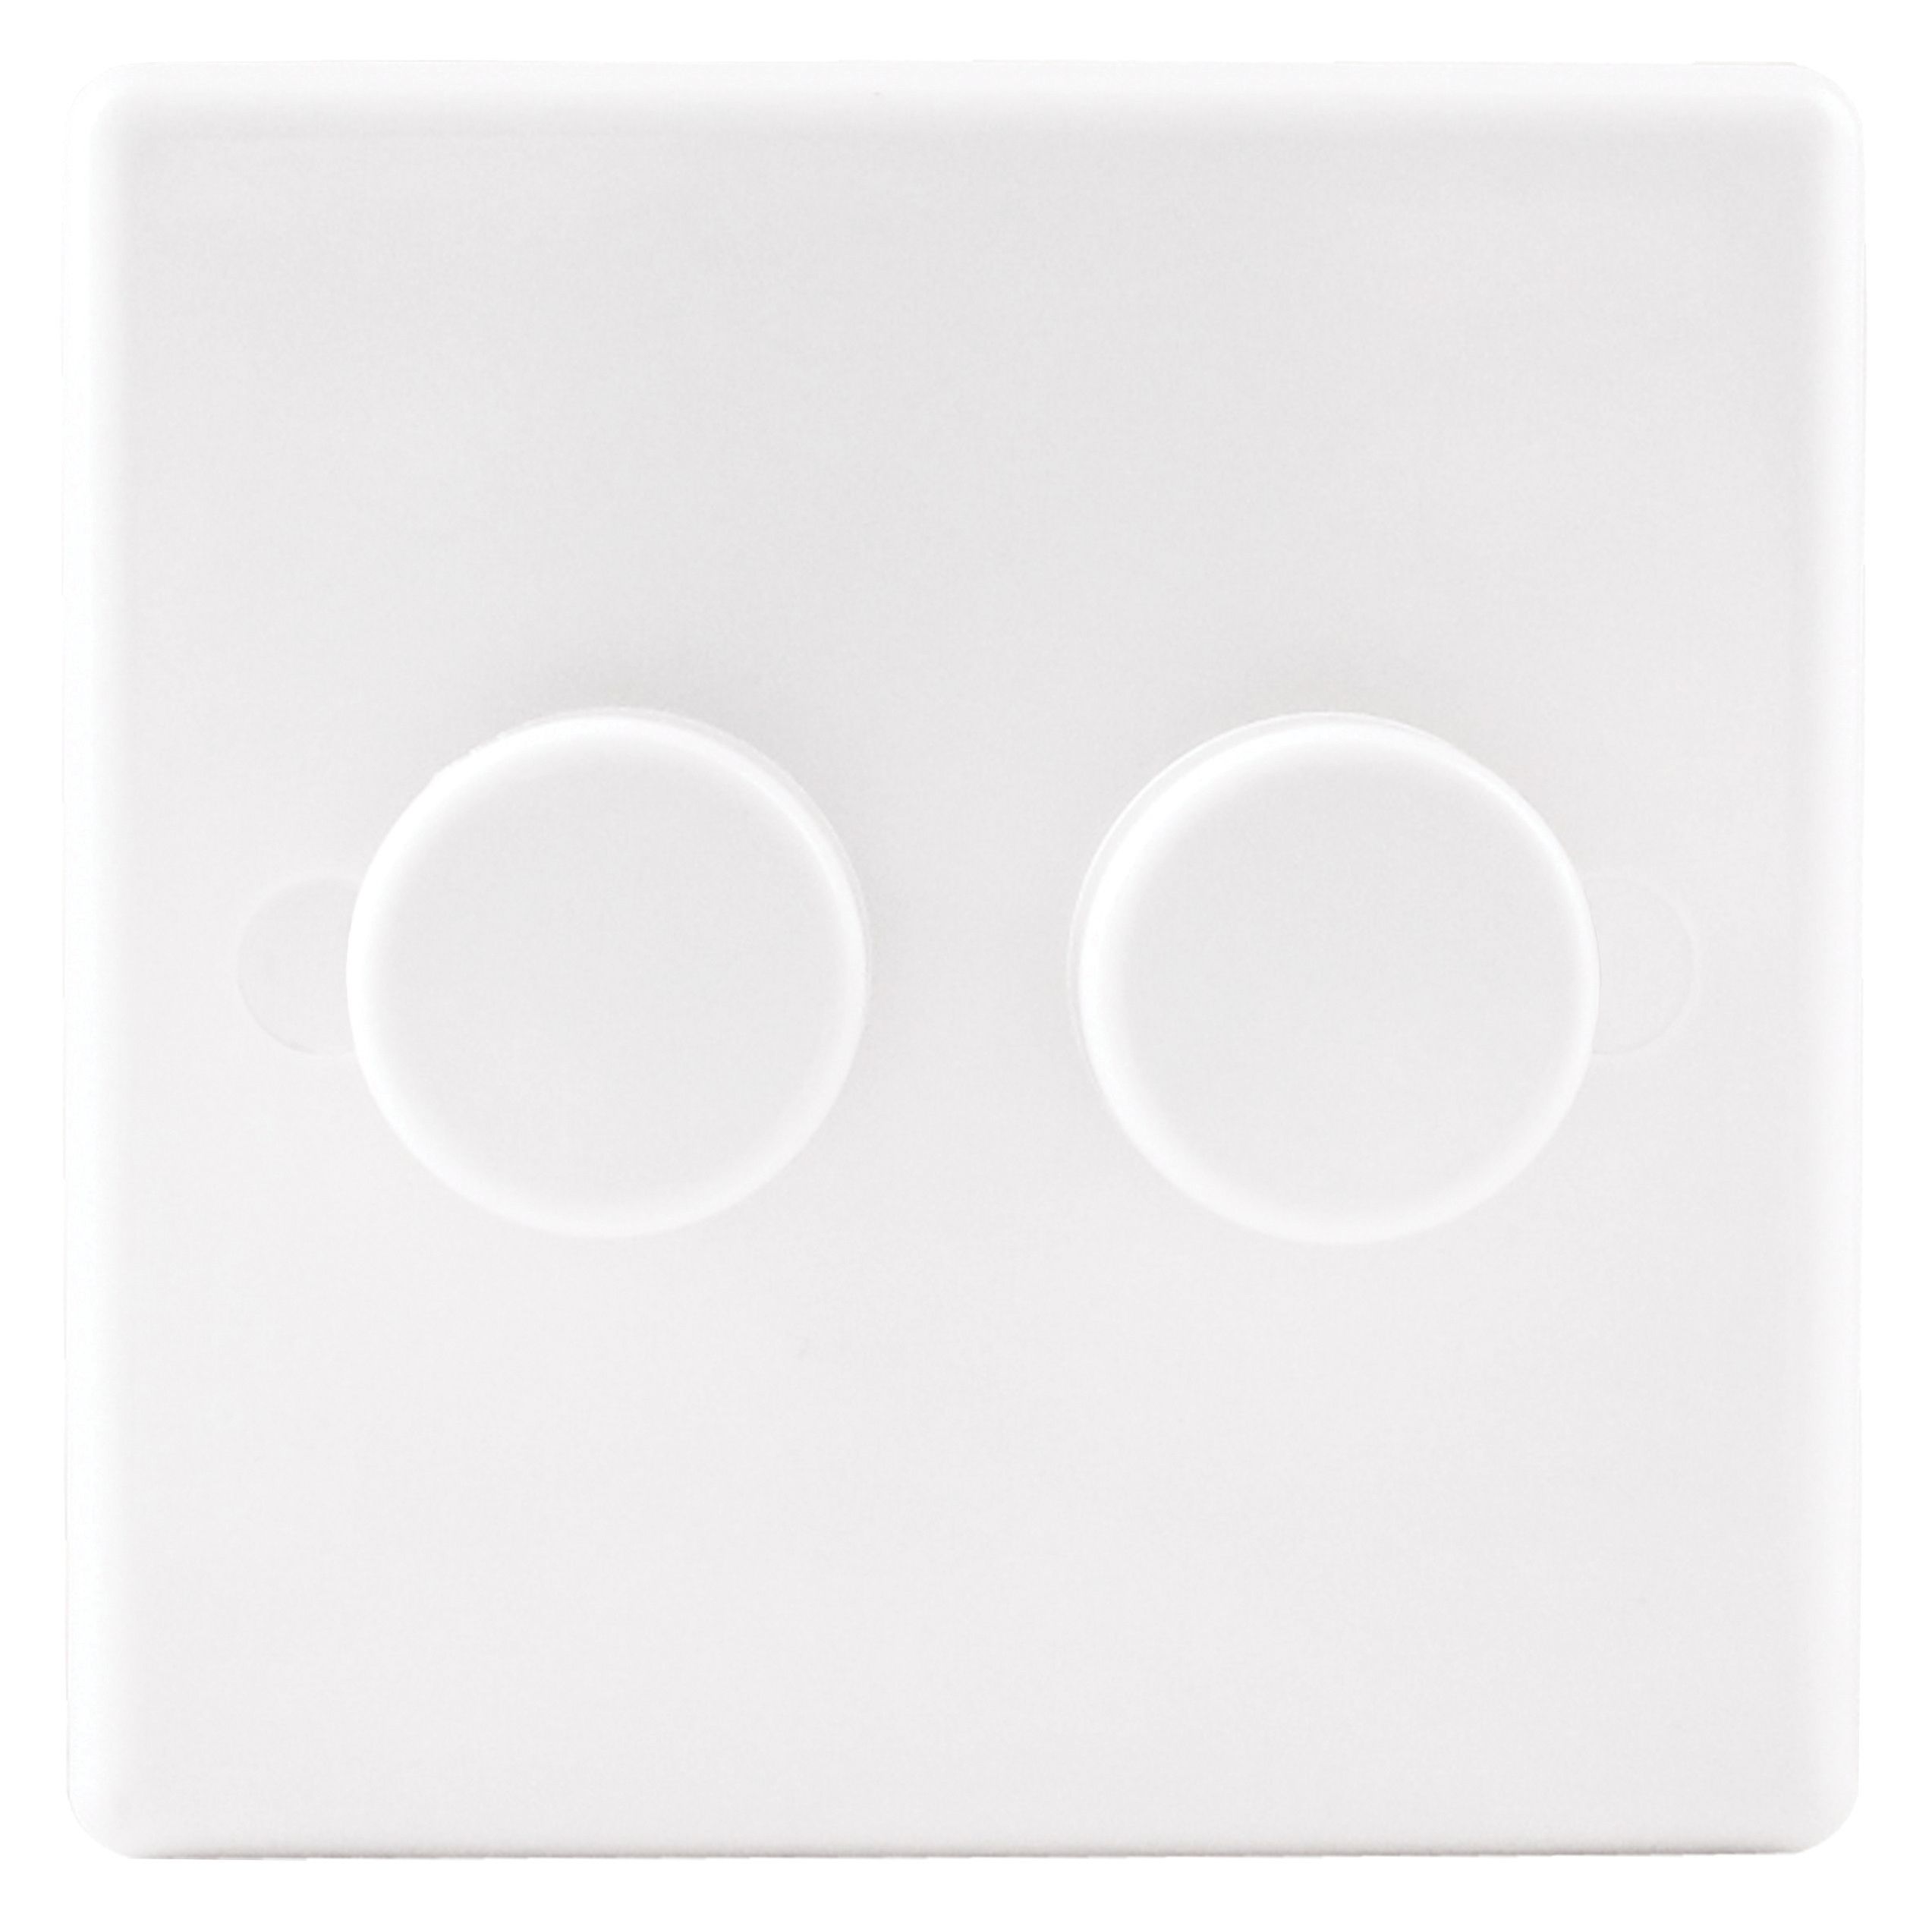 Image of Wickes Dimmer Switch 2 Gang 2 Way 400W Slimline - White